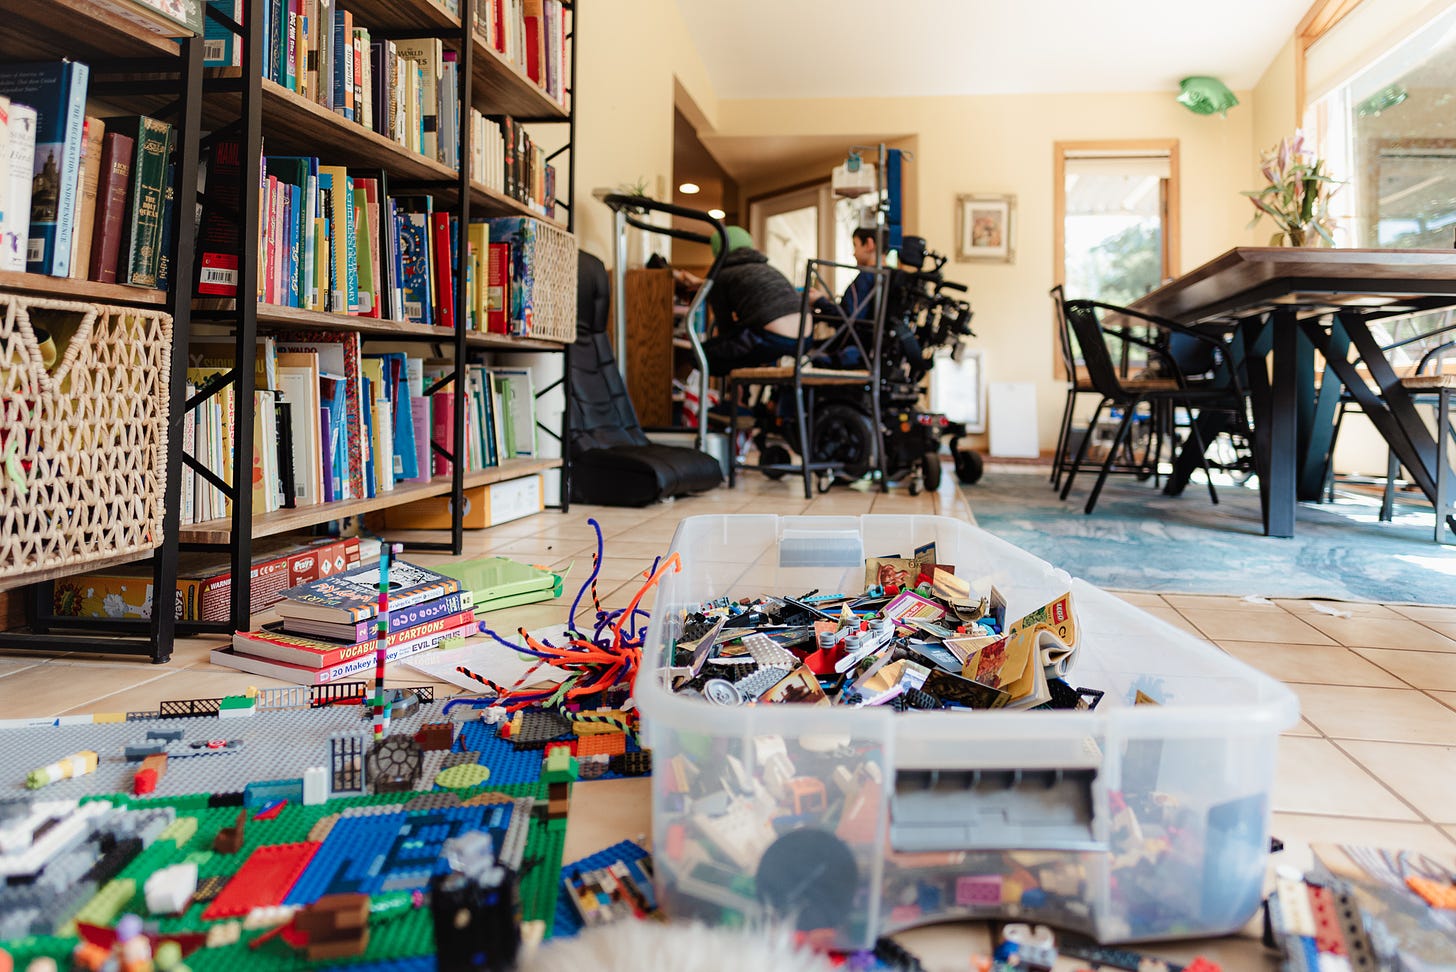 In the foreground, a pile of LEGO and other toys. Along one wall are full bookshelves. In the background, a boy in a wheelchair and another on a dining chair crowd next to a smart speaker. 